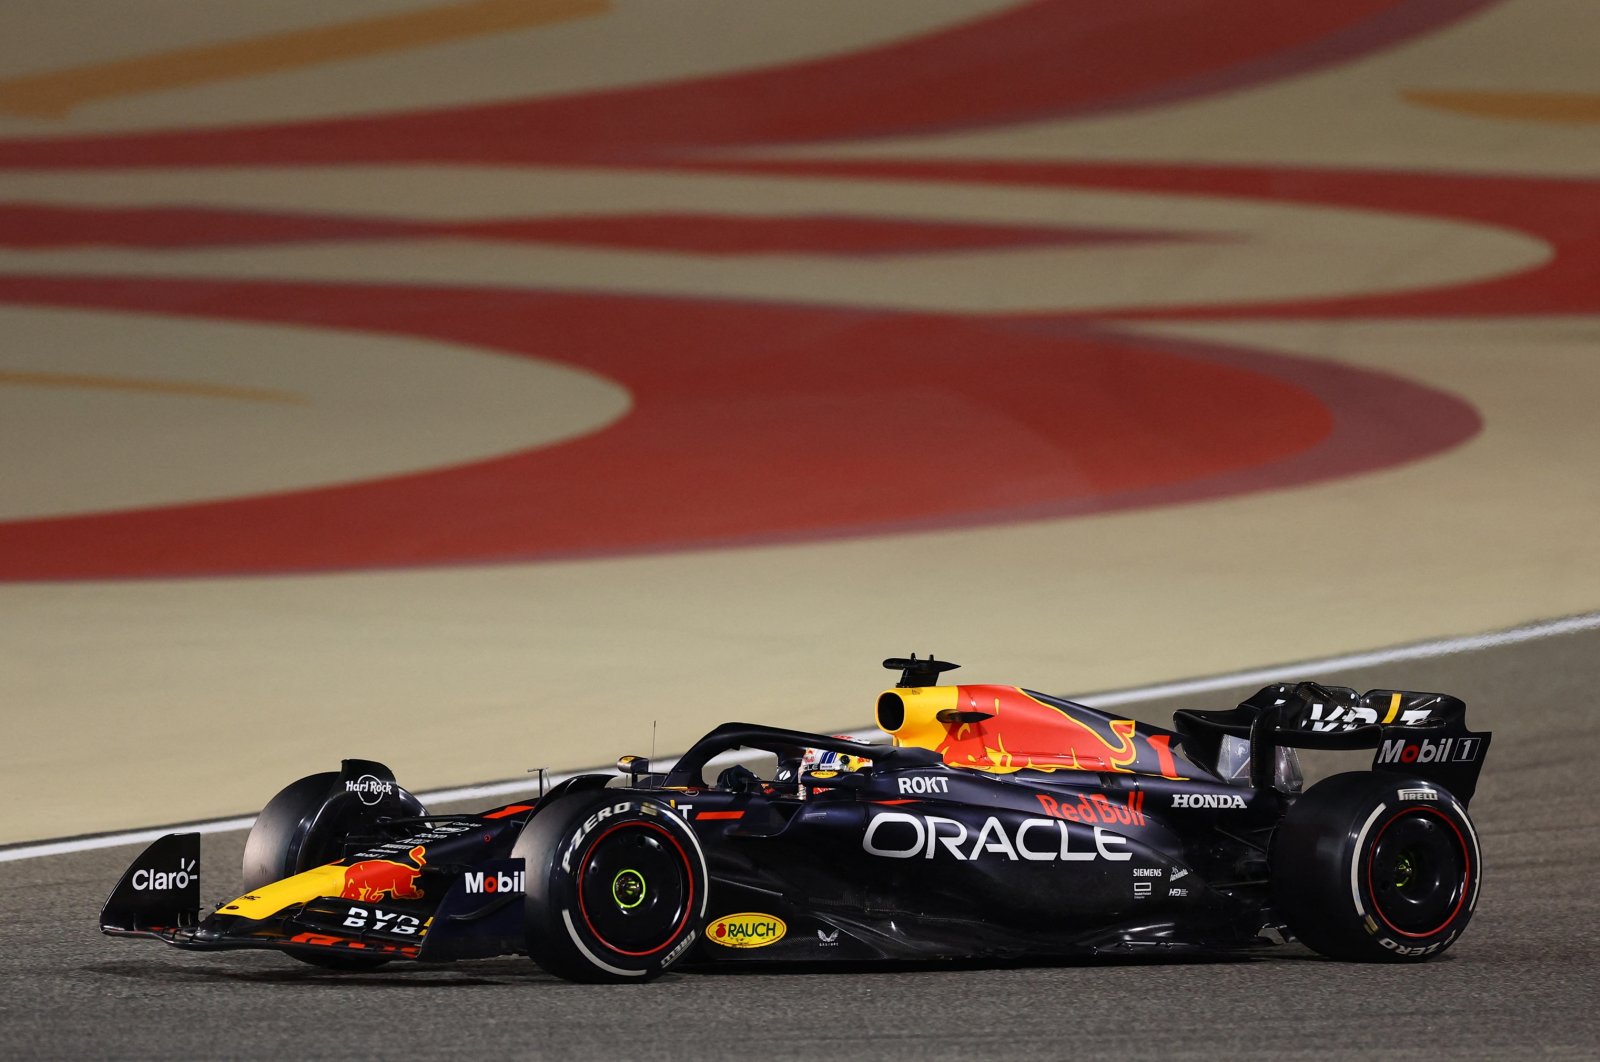 Red Bull&#039;s Max Verstappen in action during the F1 Bahrain Grand Prix race at Bahrain International Circuit, Sakhir, Bahrain, March 5, 2023. (Reuters Photo)